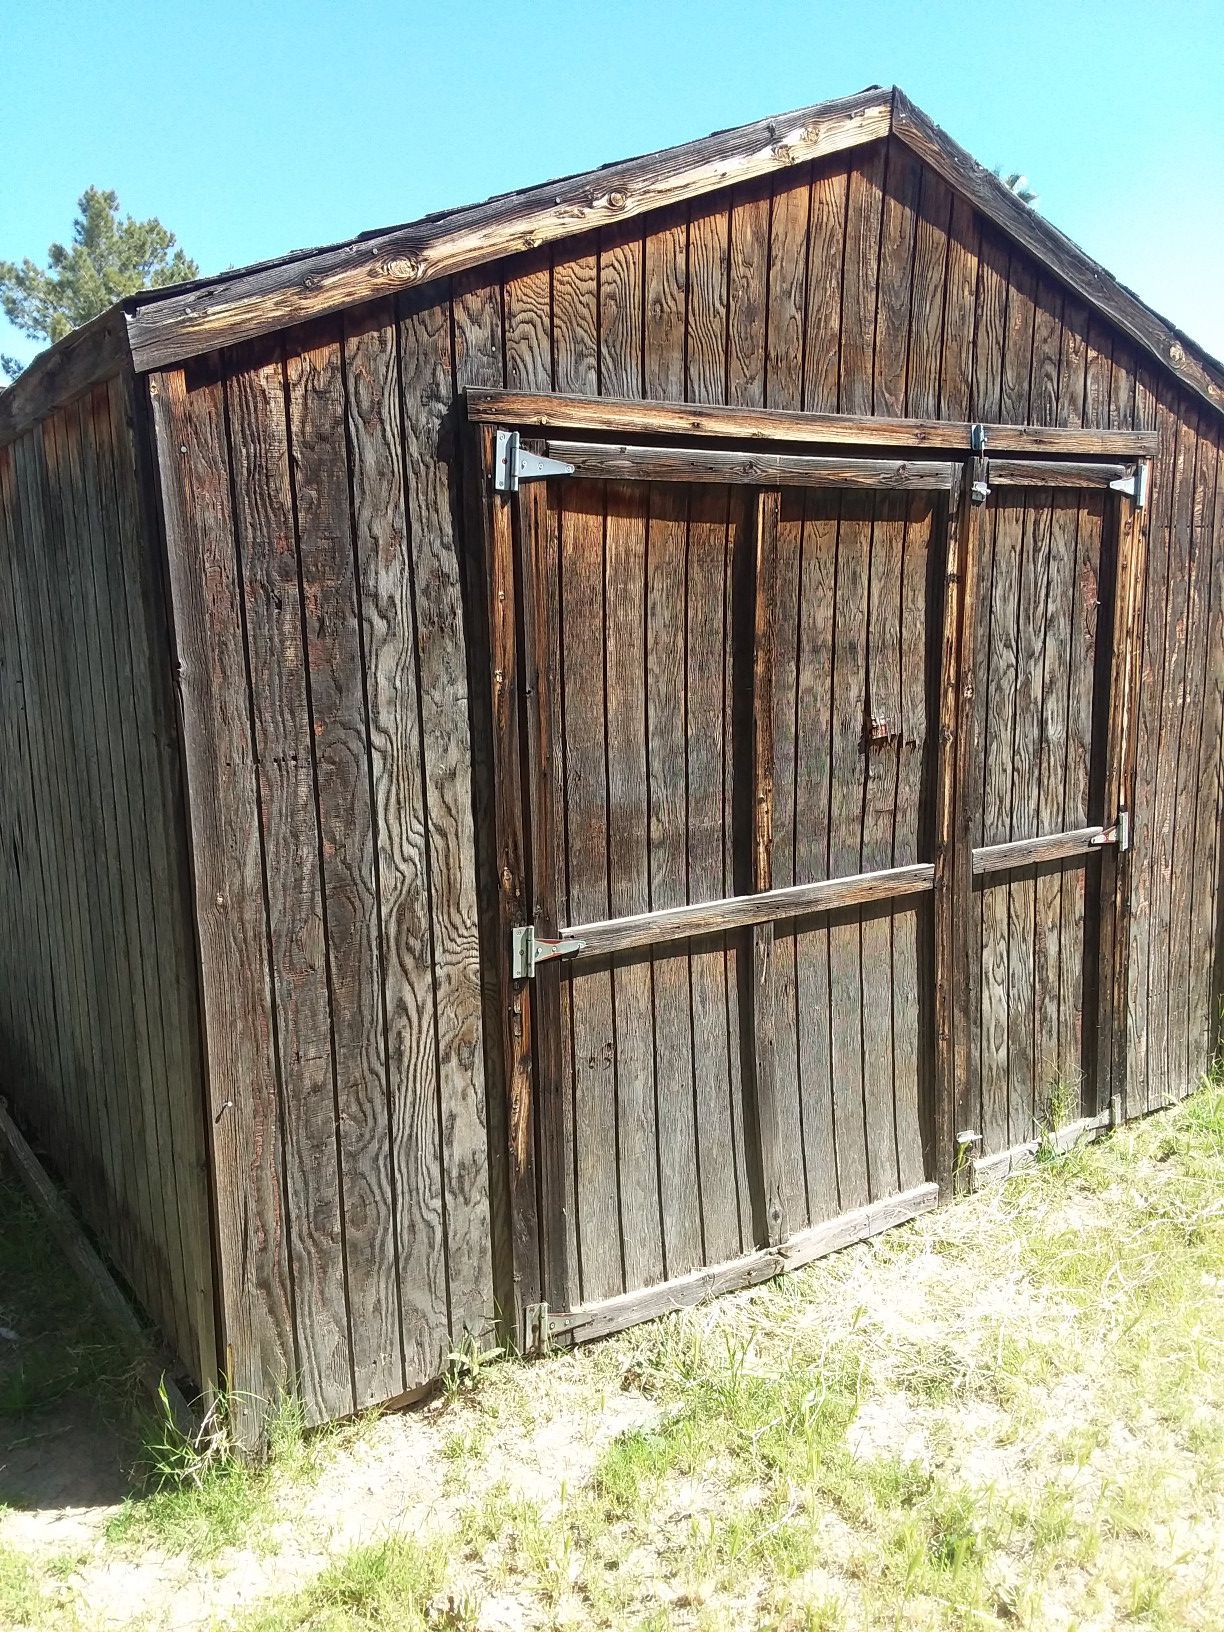 Wooden shed w/ shingled roof. 10 ft high at peak. 9 ft wide. 7 ft deep.